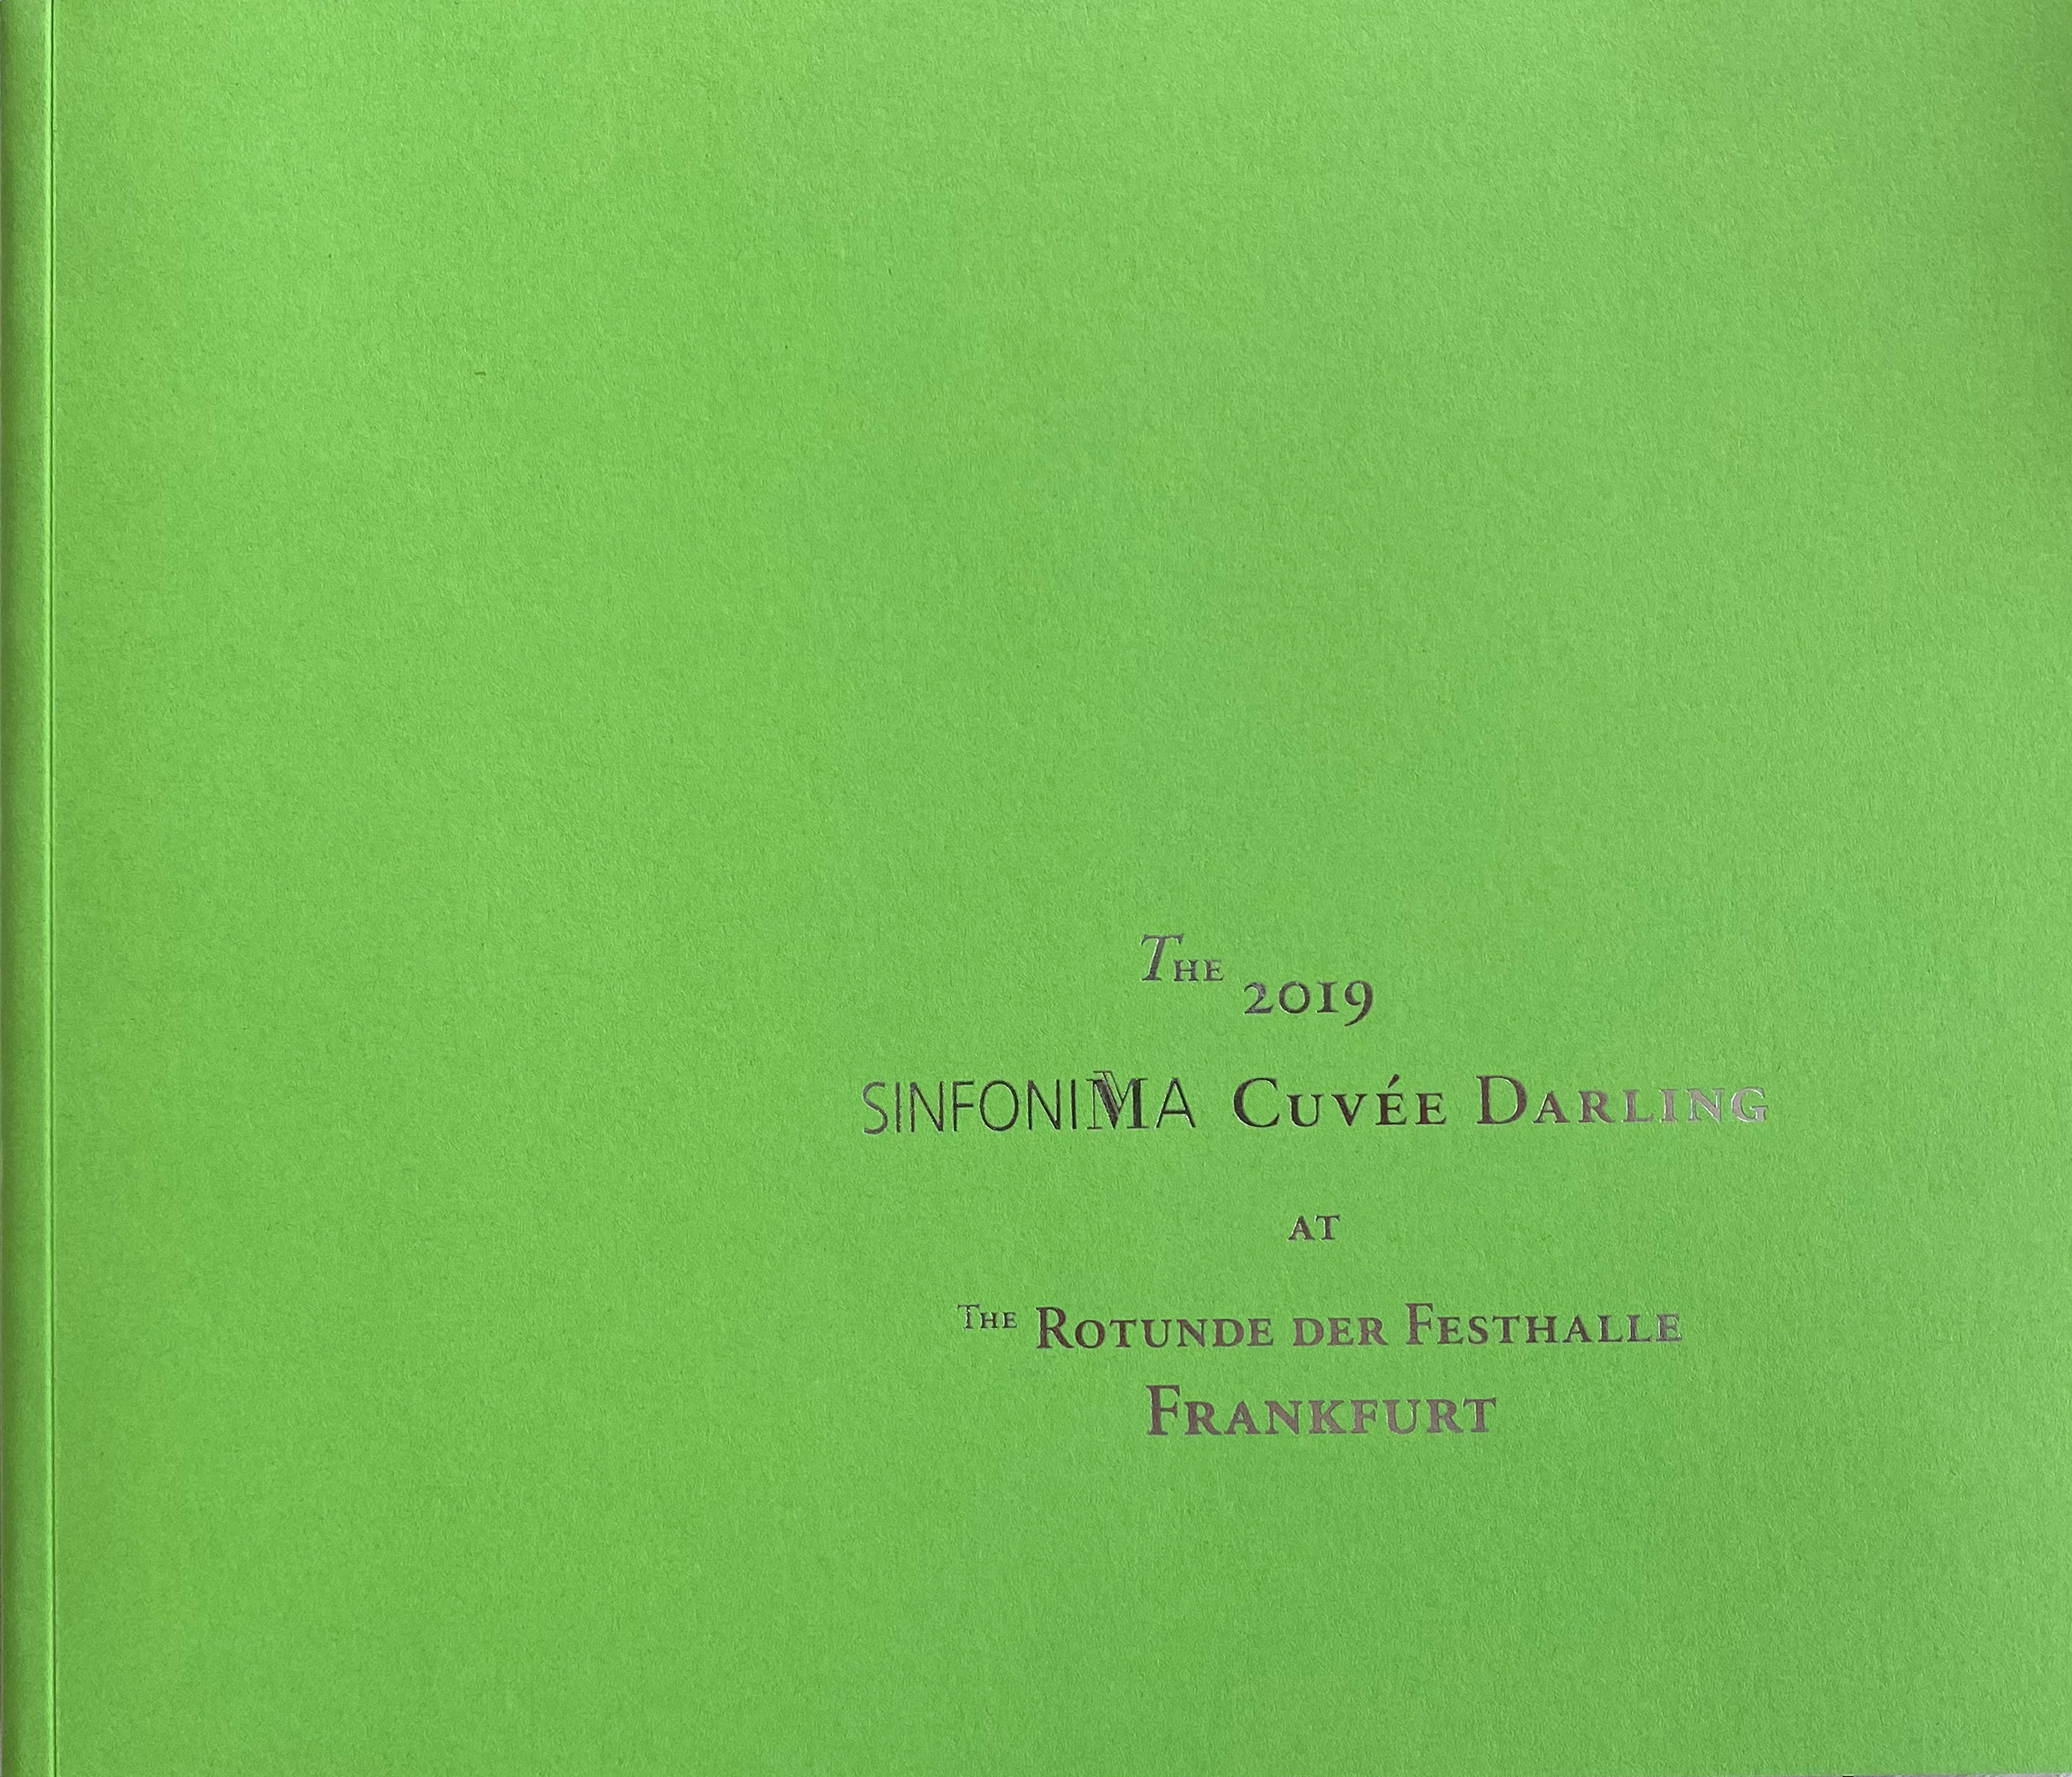 The 2019 Sinfonima Cuvee Darling at the Rotunde